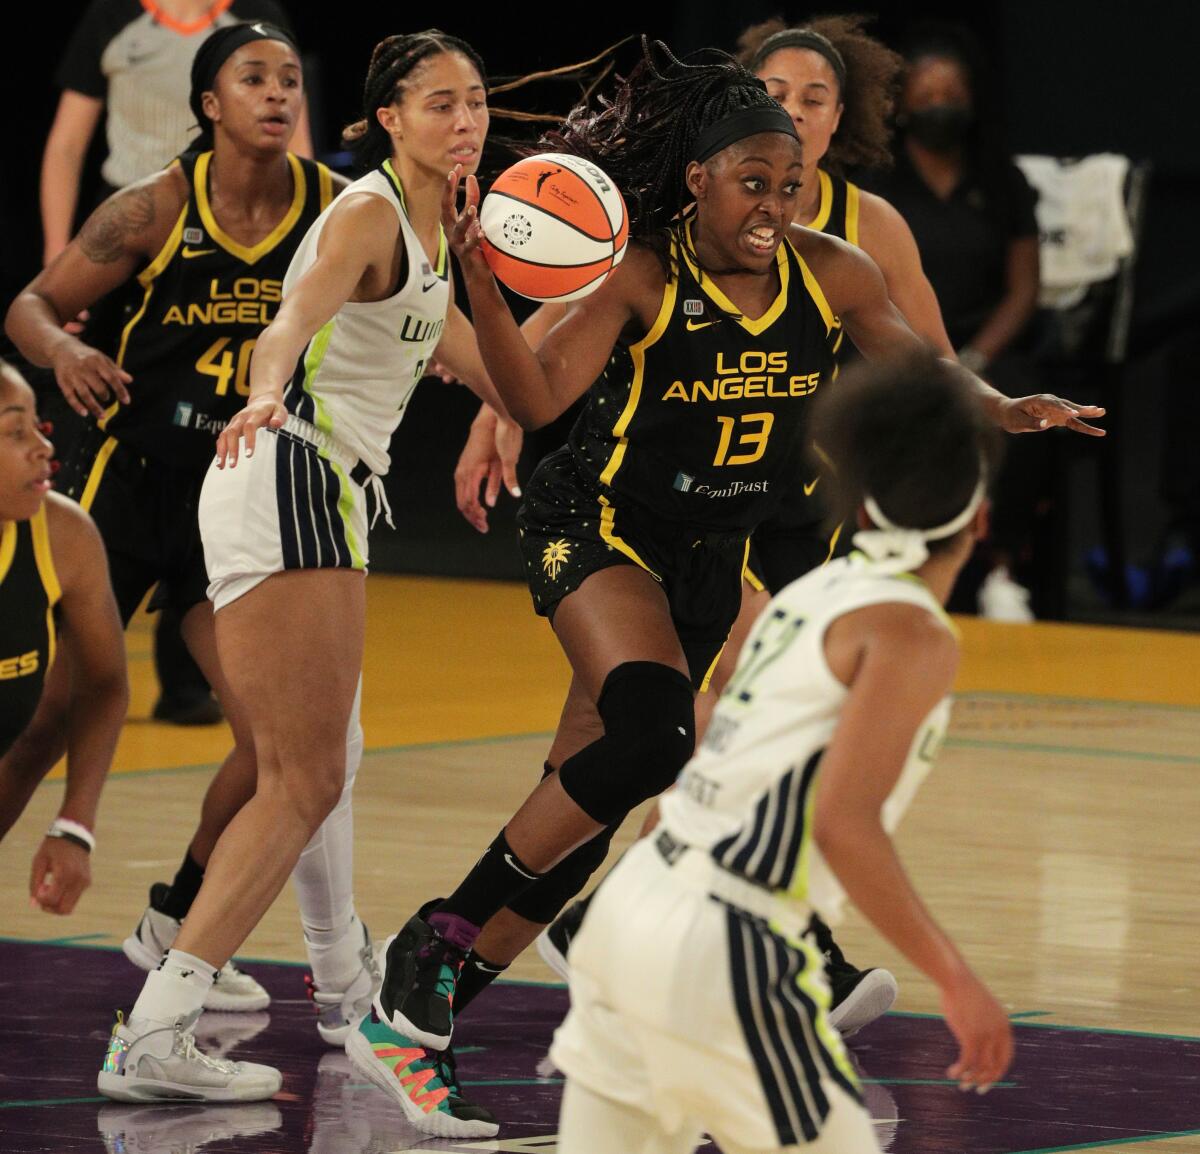 The Sparks' Chiney Ogwumike starts a fast break after grabbing a rebound May 14, 2021.